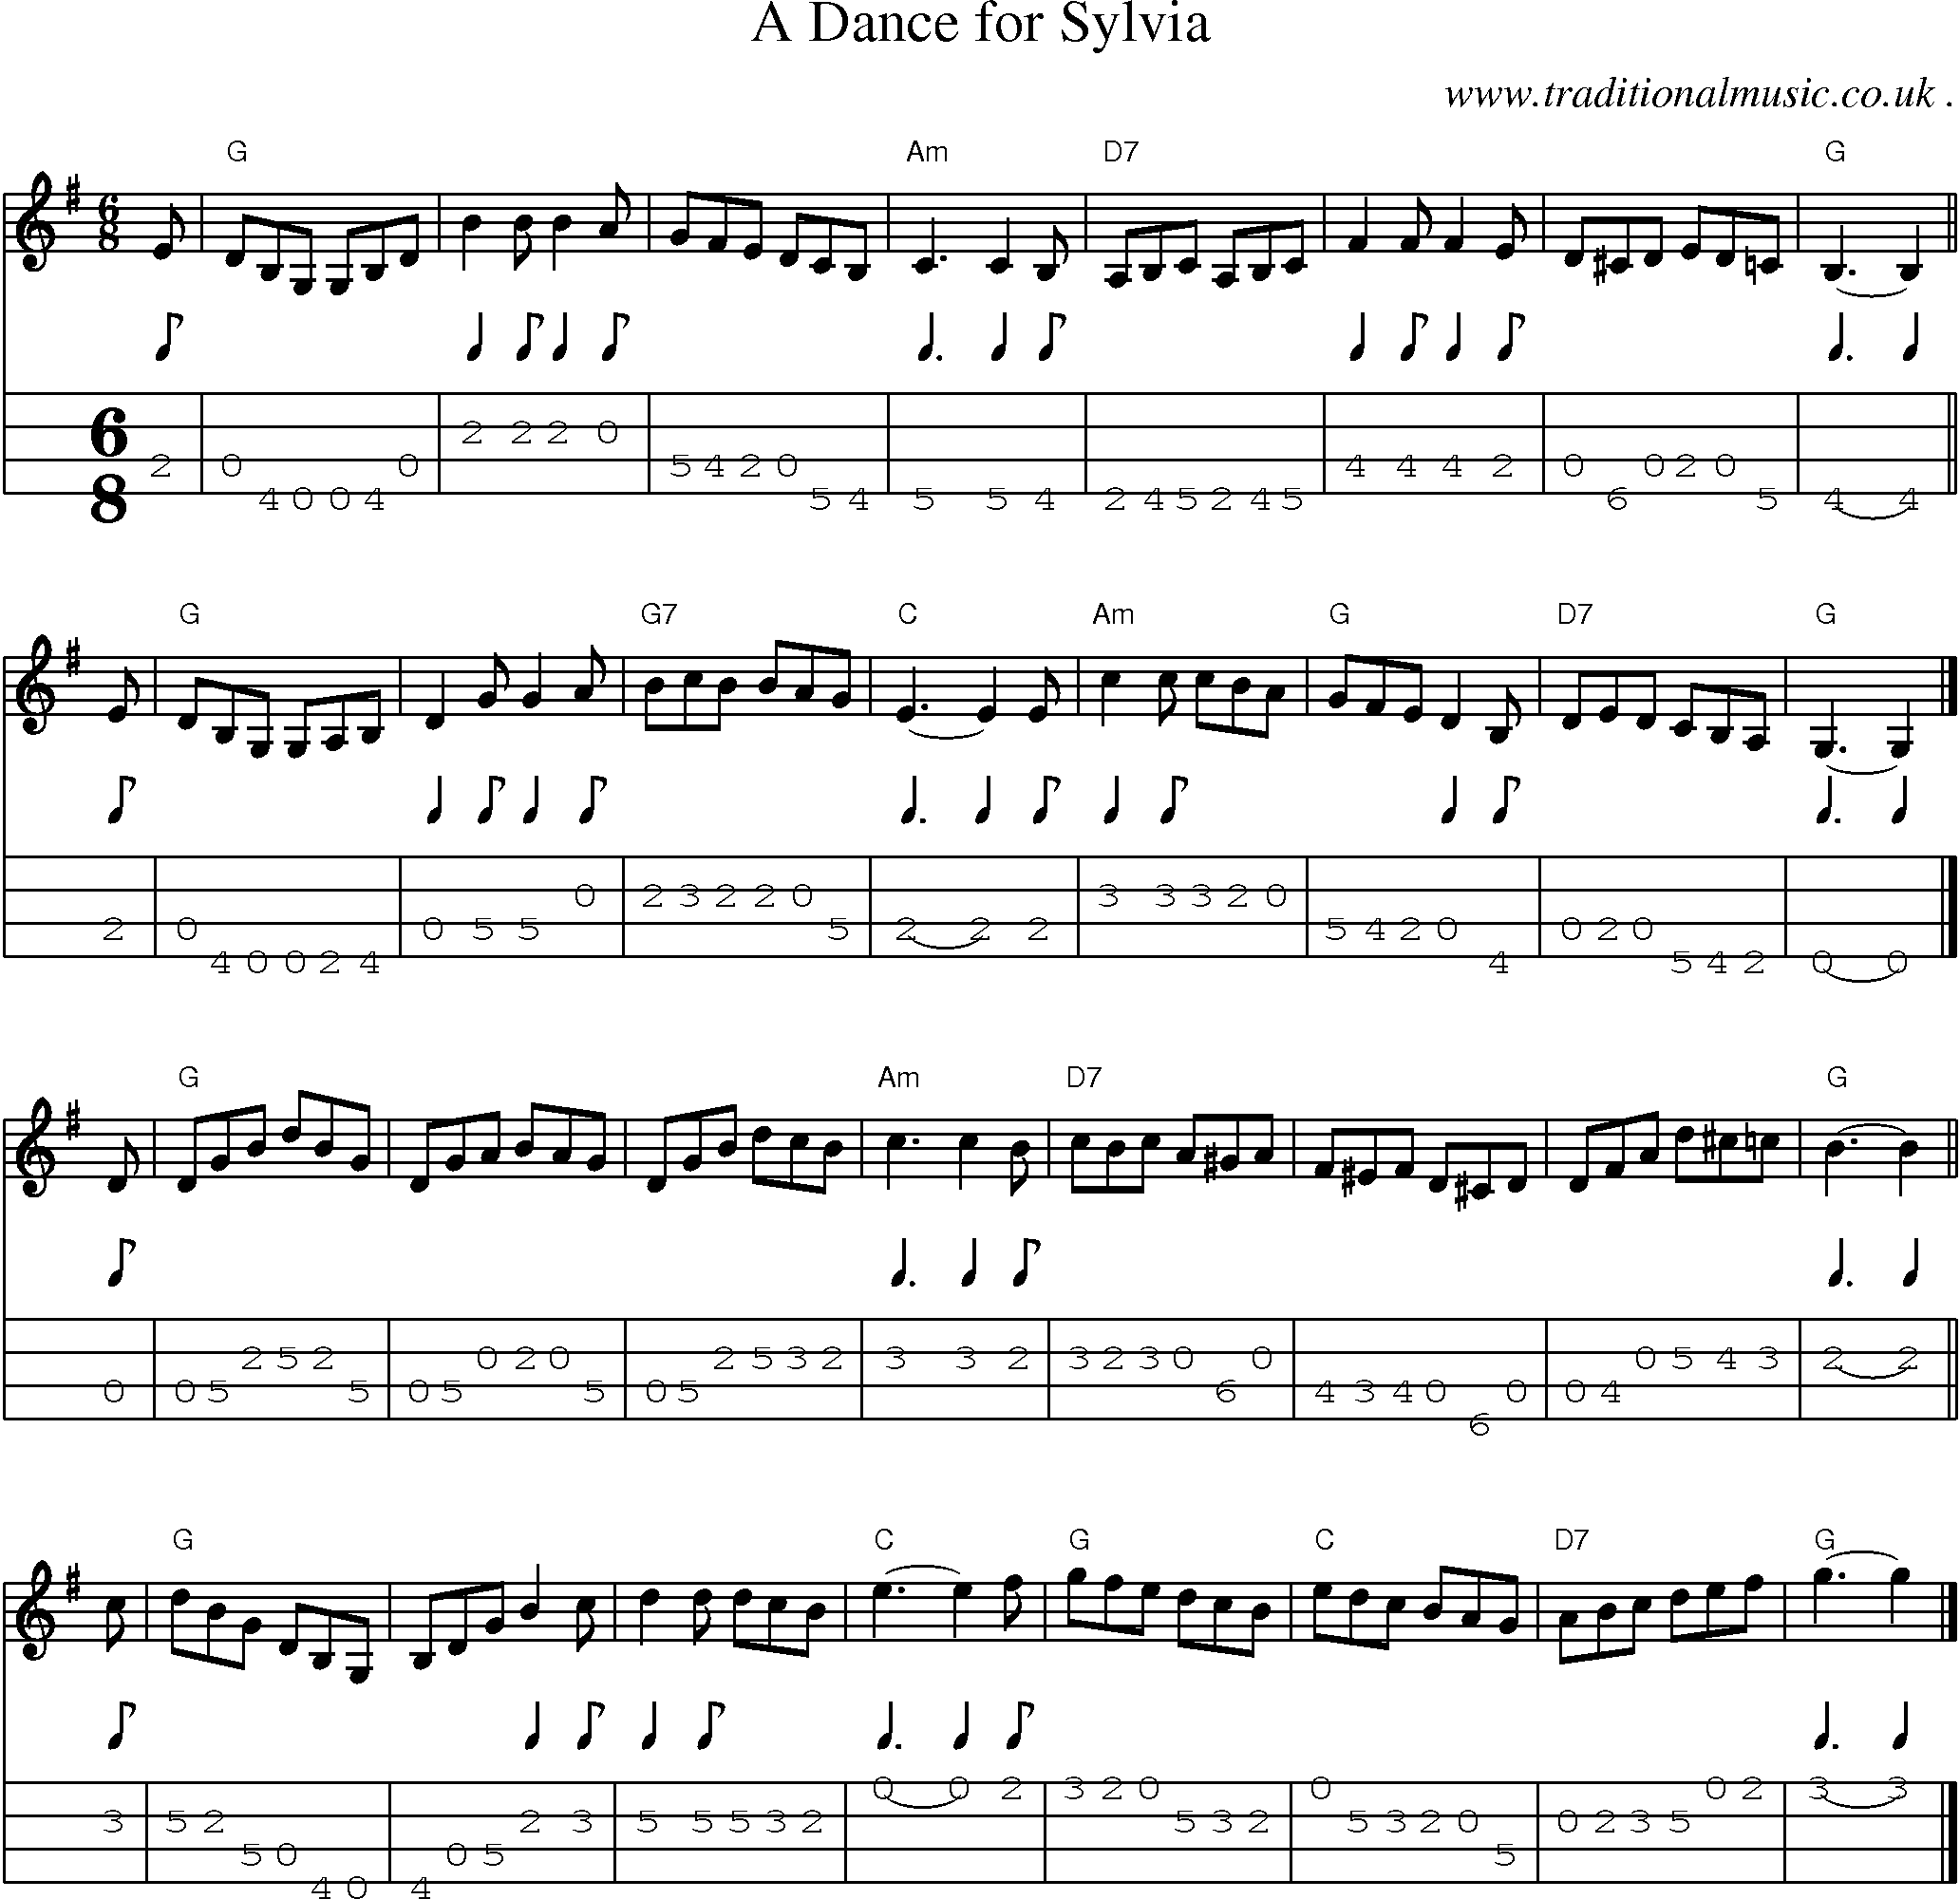 Sheet-music  score, Chords and Mandolin Tabs for A Dance For Sylvia